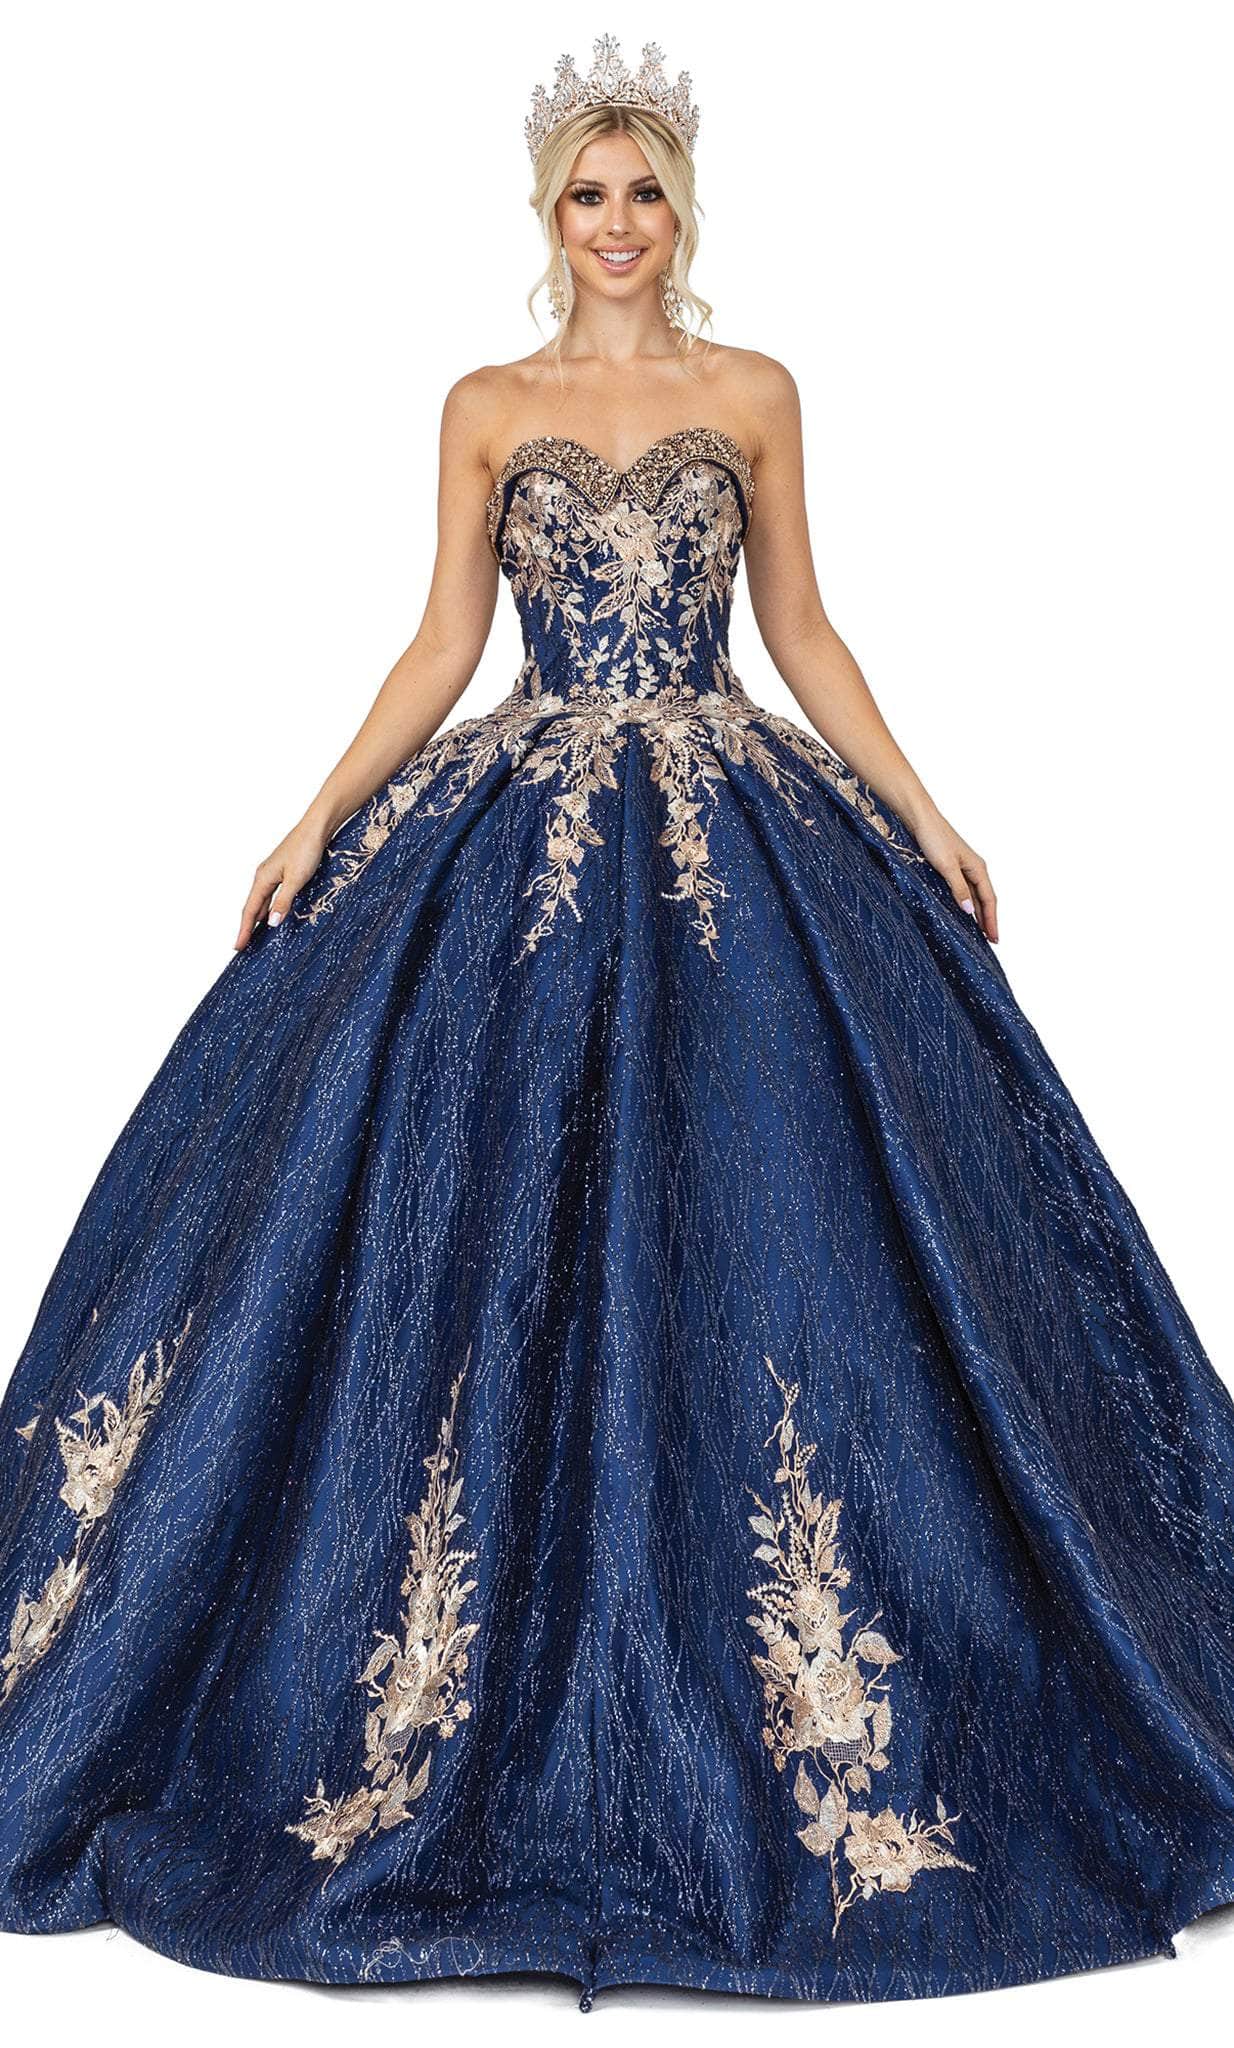 Dancing Queen 1541 - Embroidered Quinceanera Ballgown Long Dresses